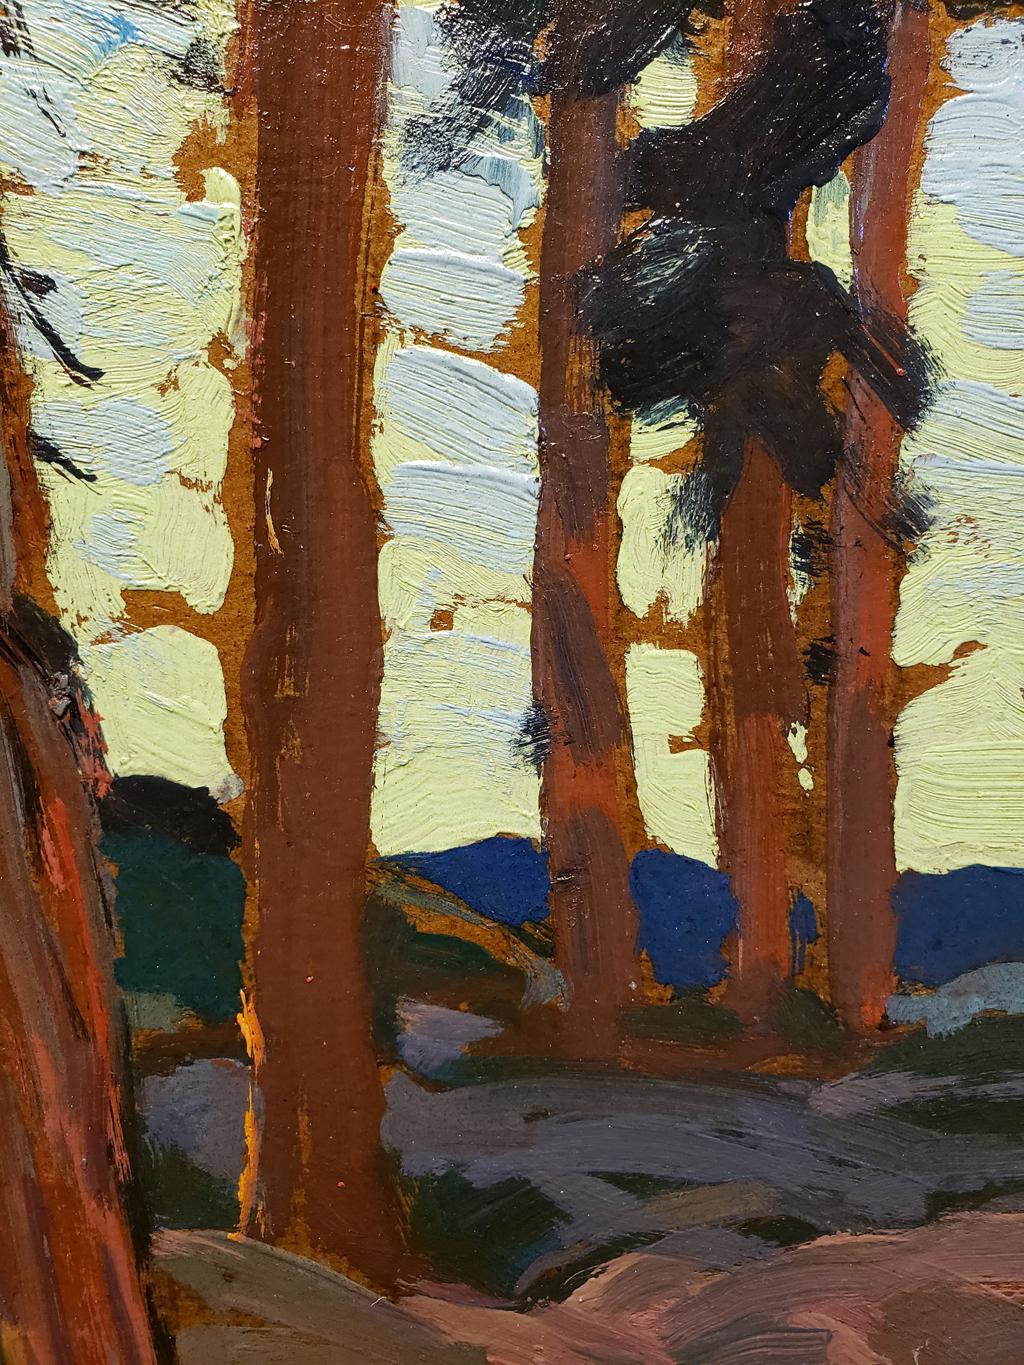 Provenance
Consigned to the gallery by private collectors

Description
This view created en plein air of a trail meandering through a vertical stand of pine trees, reveals an inviting access point through an intimate forest, with an abstracted